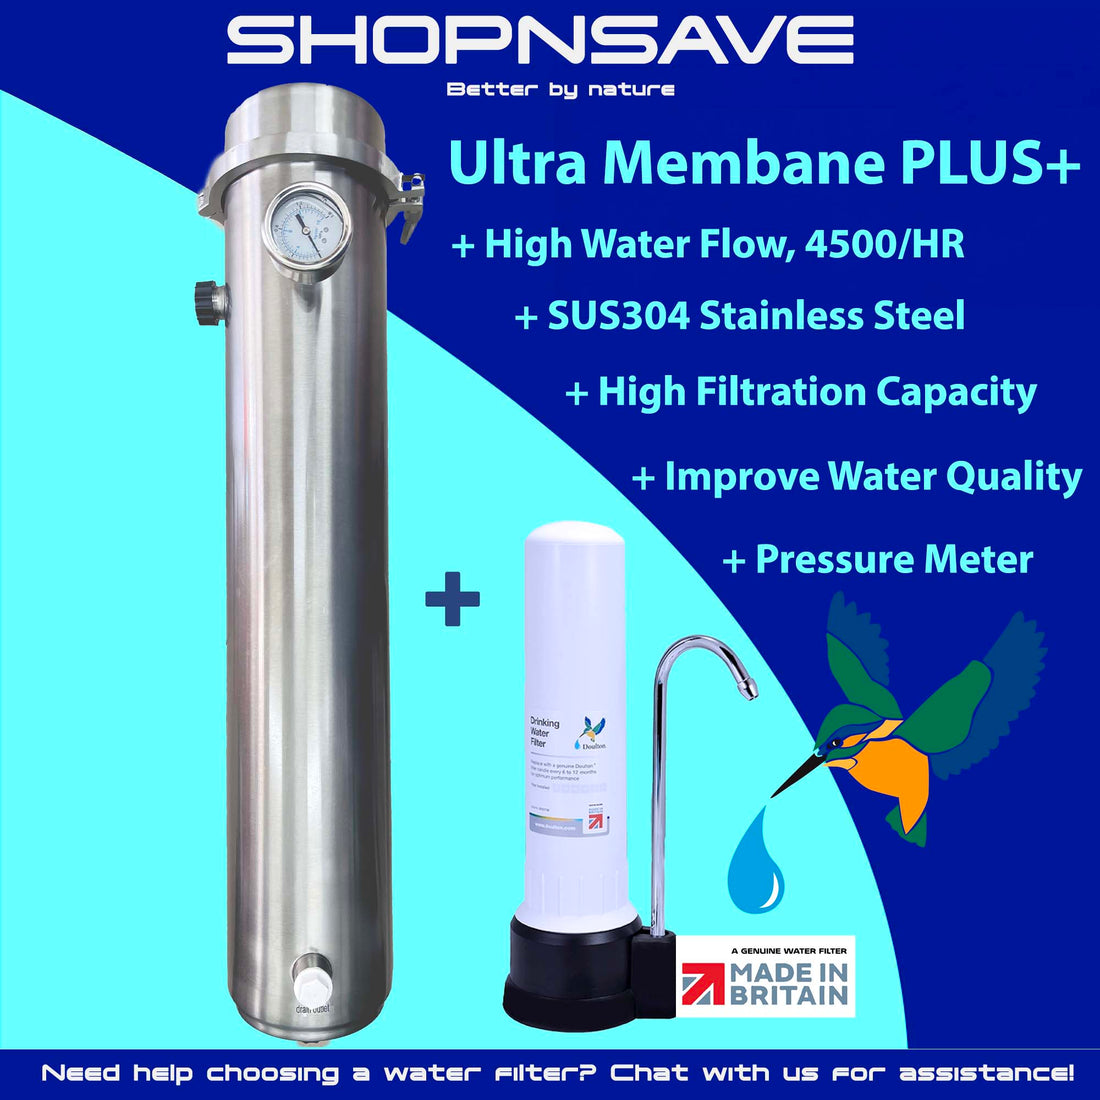 (FREE Installation) Ultra Membrane Plus Whole Home Filtration + Doulton Drinking Water Purifier System